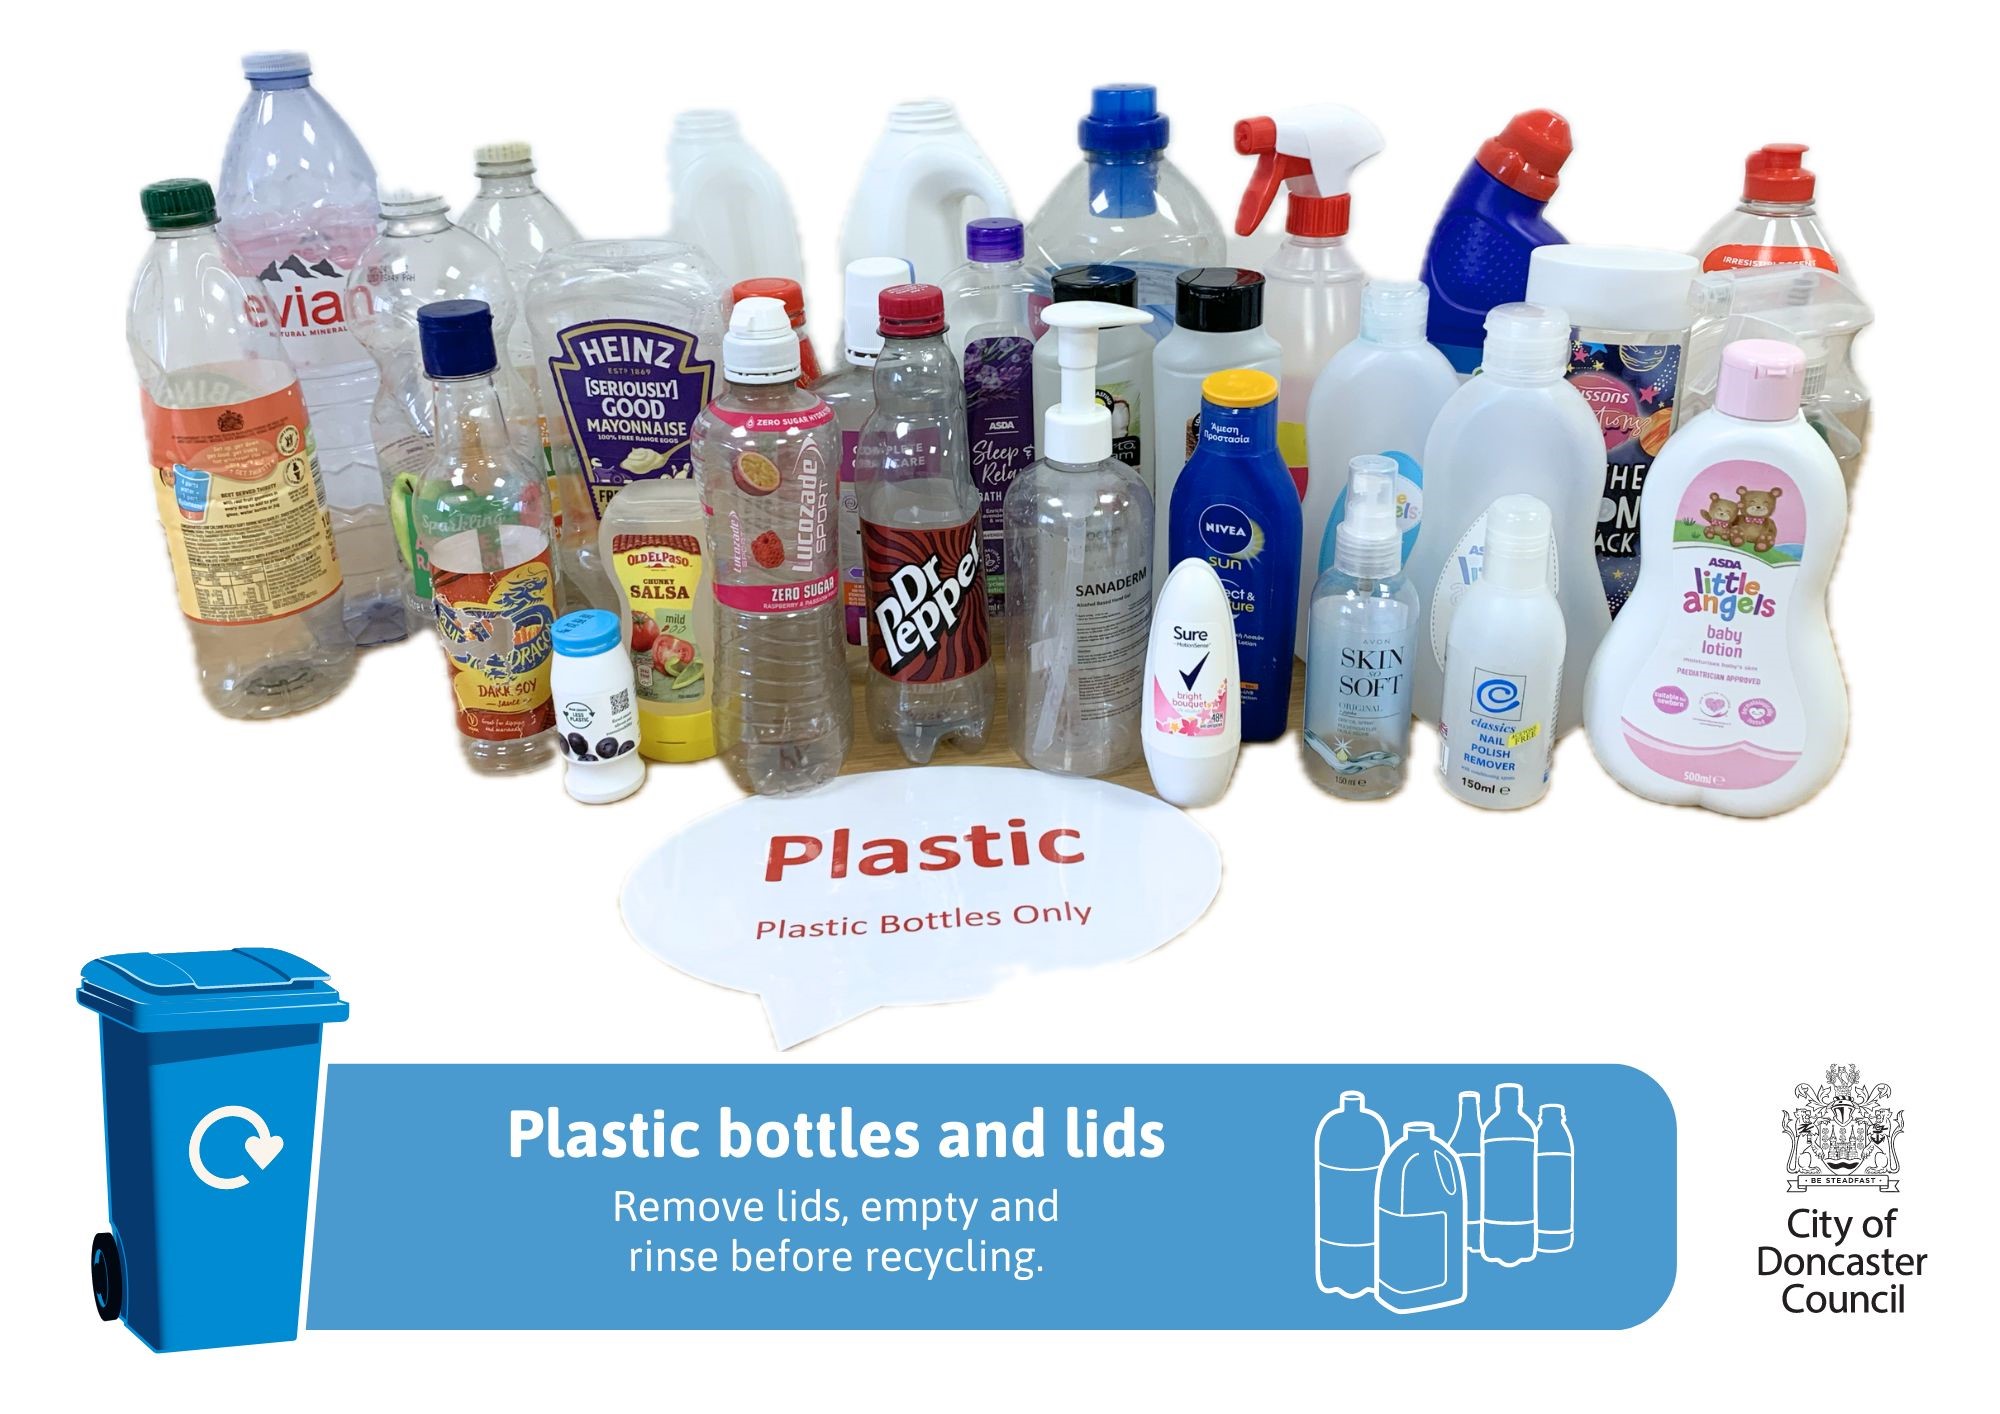  examples of plastics accepted